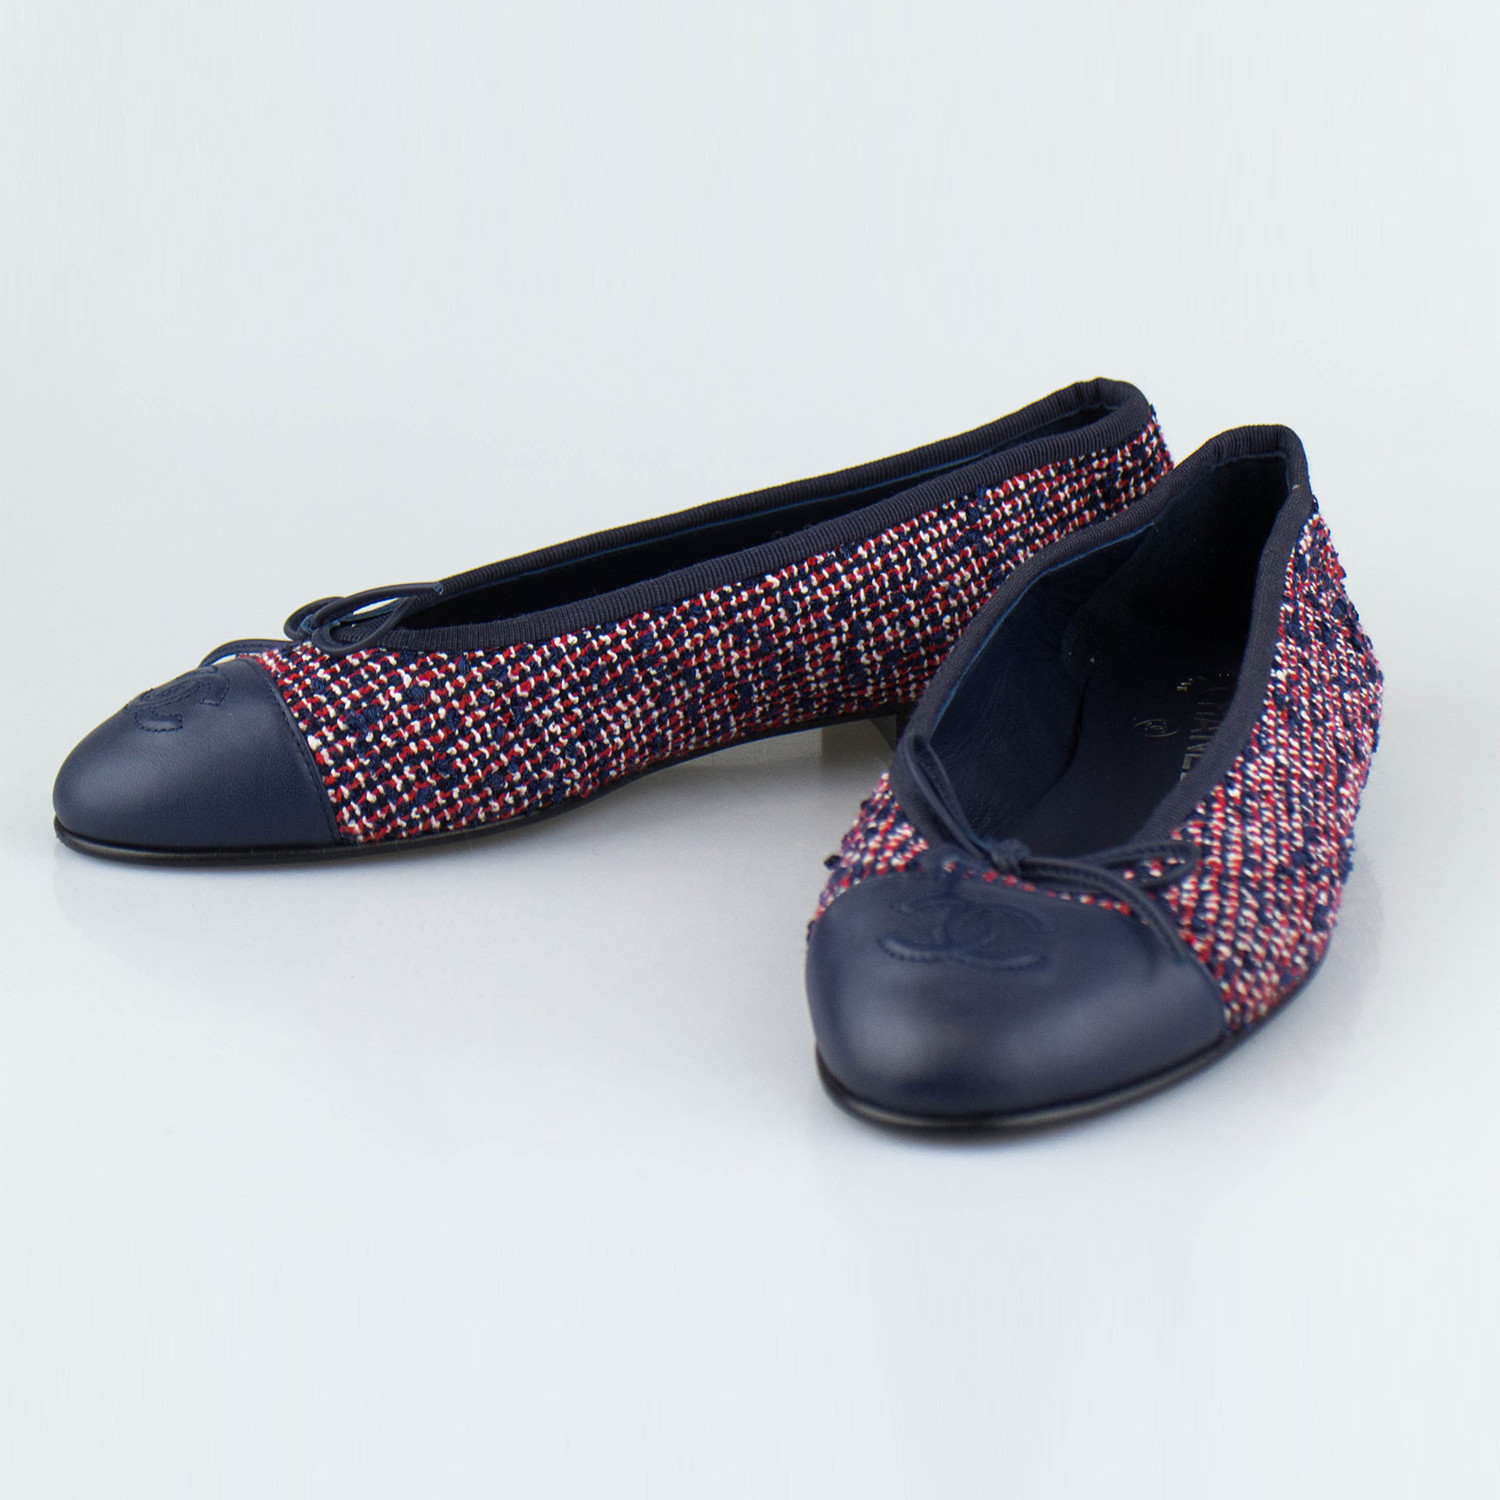 Chanel Tweed + Leather Cap Toe Ballerina Flats II // Multi-color (Euro: 42)  - The Designer Collection - Touch of Modern